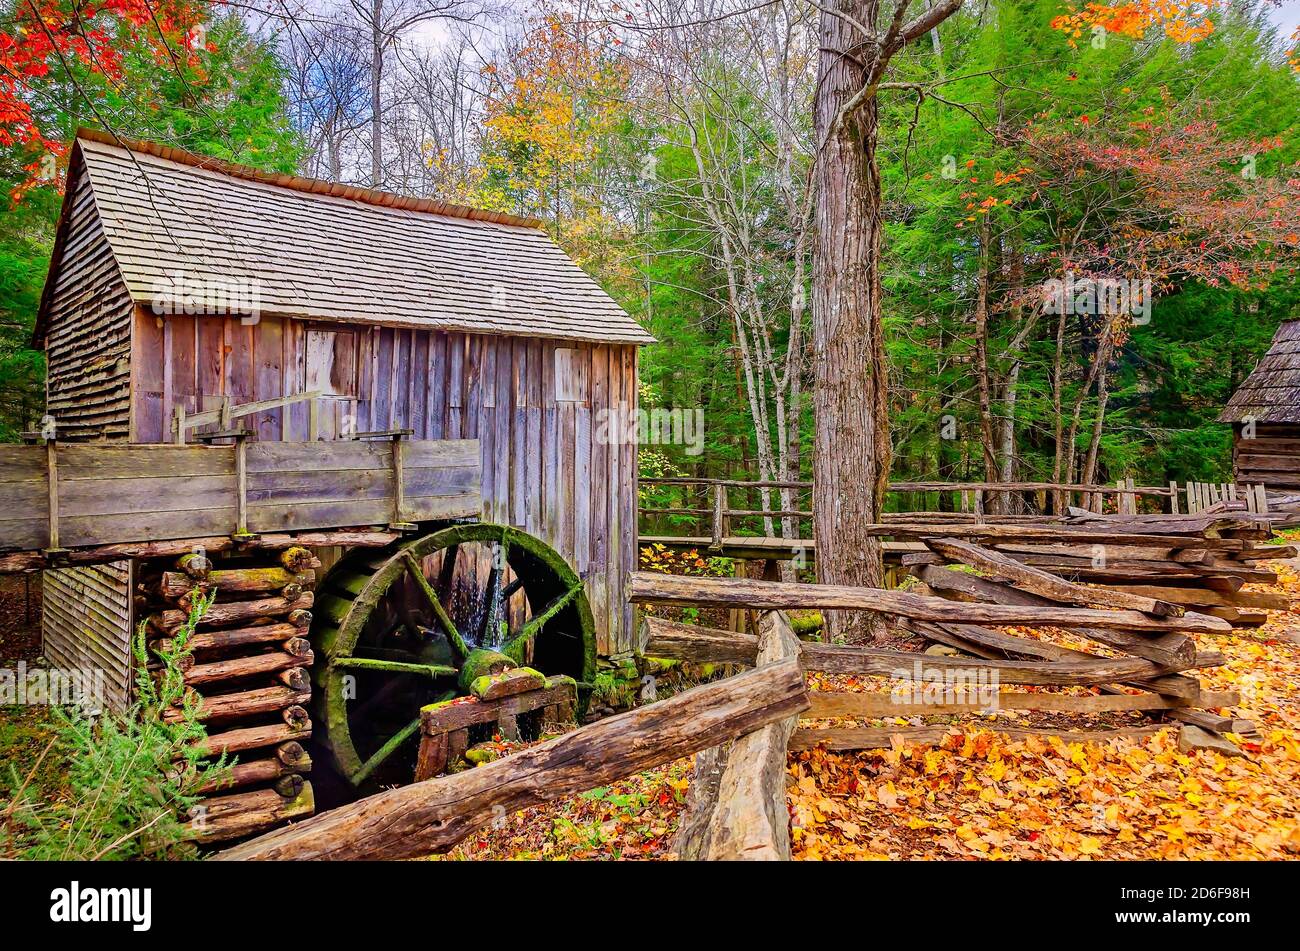 The Cable Grist Mill is pictured at the John P. Cable Mill Complex in Great Smoky Mountains National Park, Nov. 2, 2017, in Townsend, Tennessee. Stock Photo